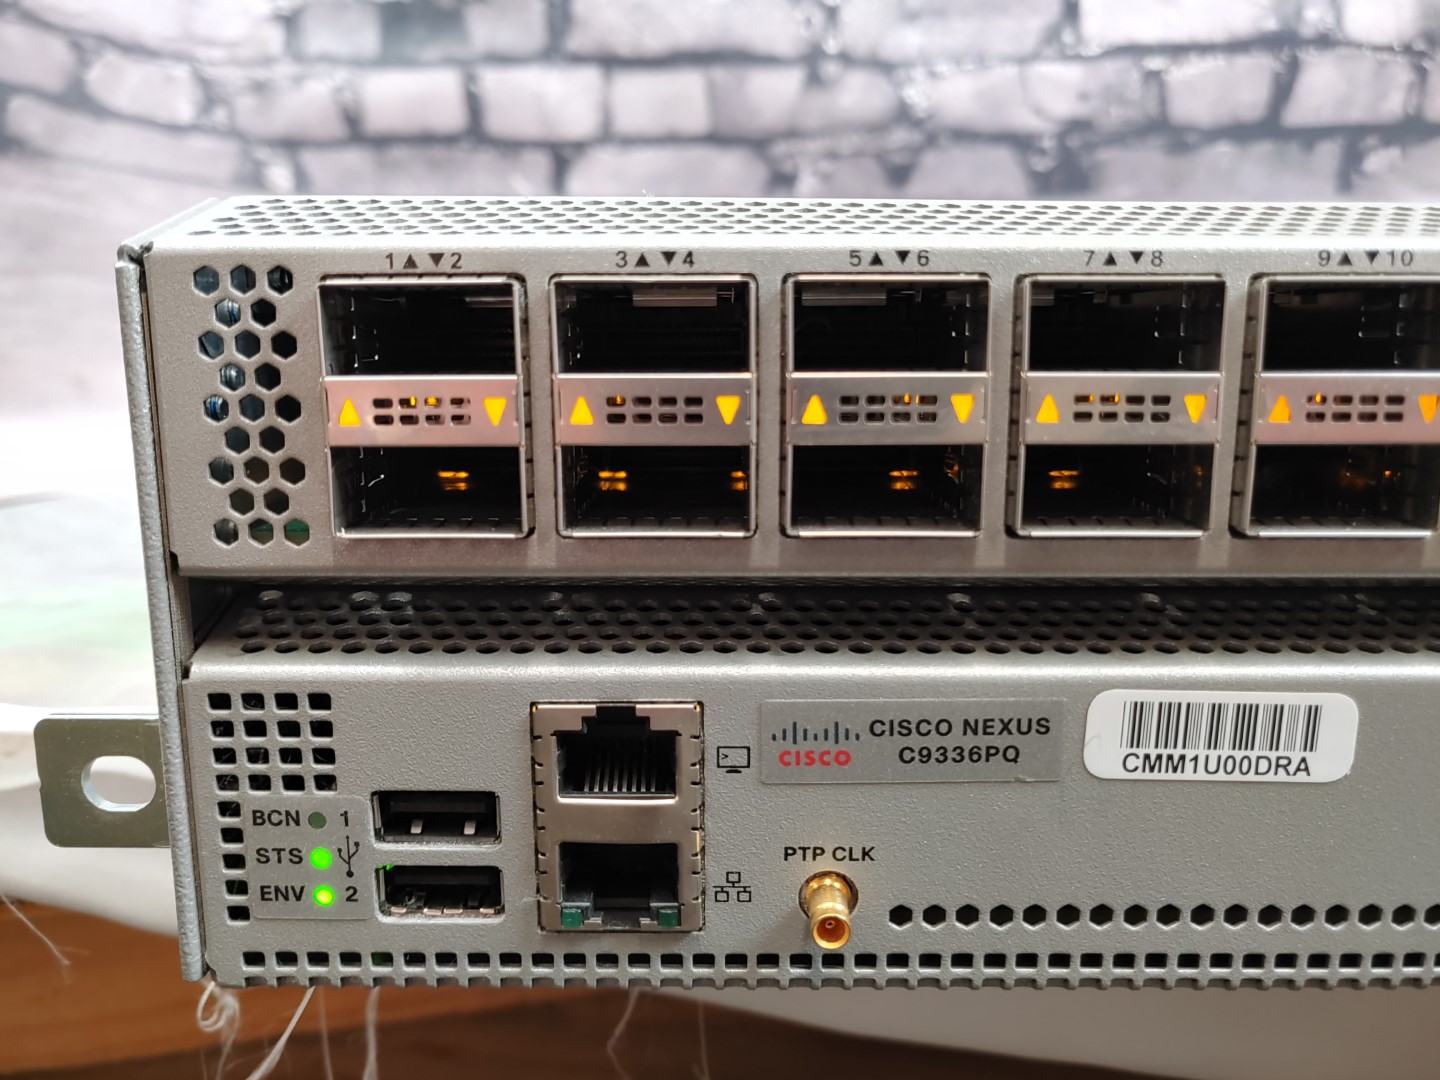 Great Condition! Tested and pulled from a working environment! **NO POWER CORD INCLUDED**Item Specifics: MPN : N9K-C9336PQ V02UPC : N/AType : Network SwitchForm Factor : Rack MountableBrand : CISCOModel : N9K-C9336PQ V02Number of LAN Ports : 36 - 2